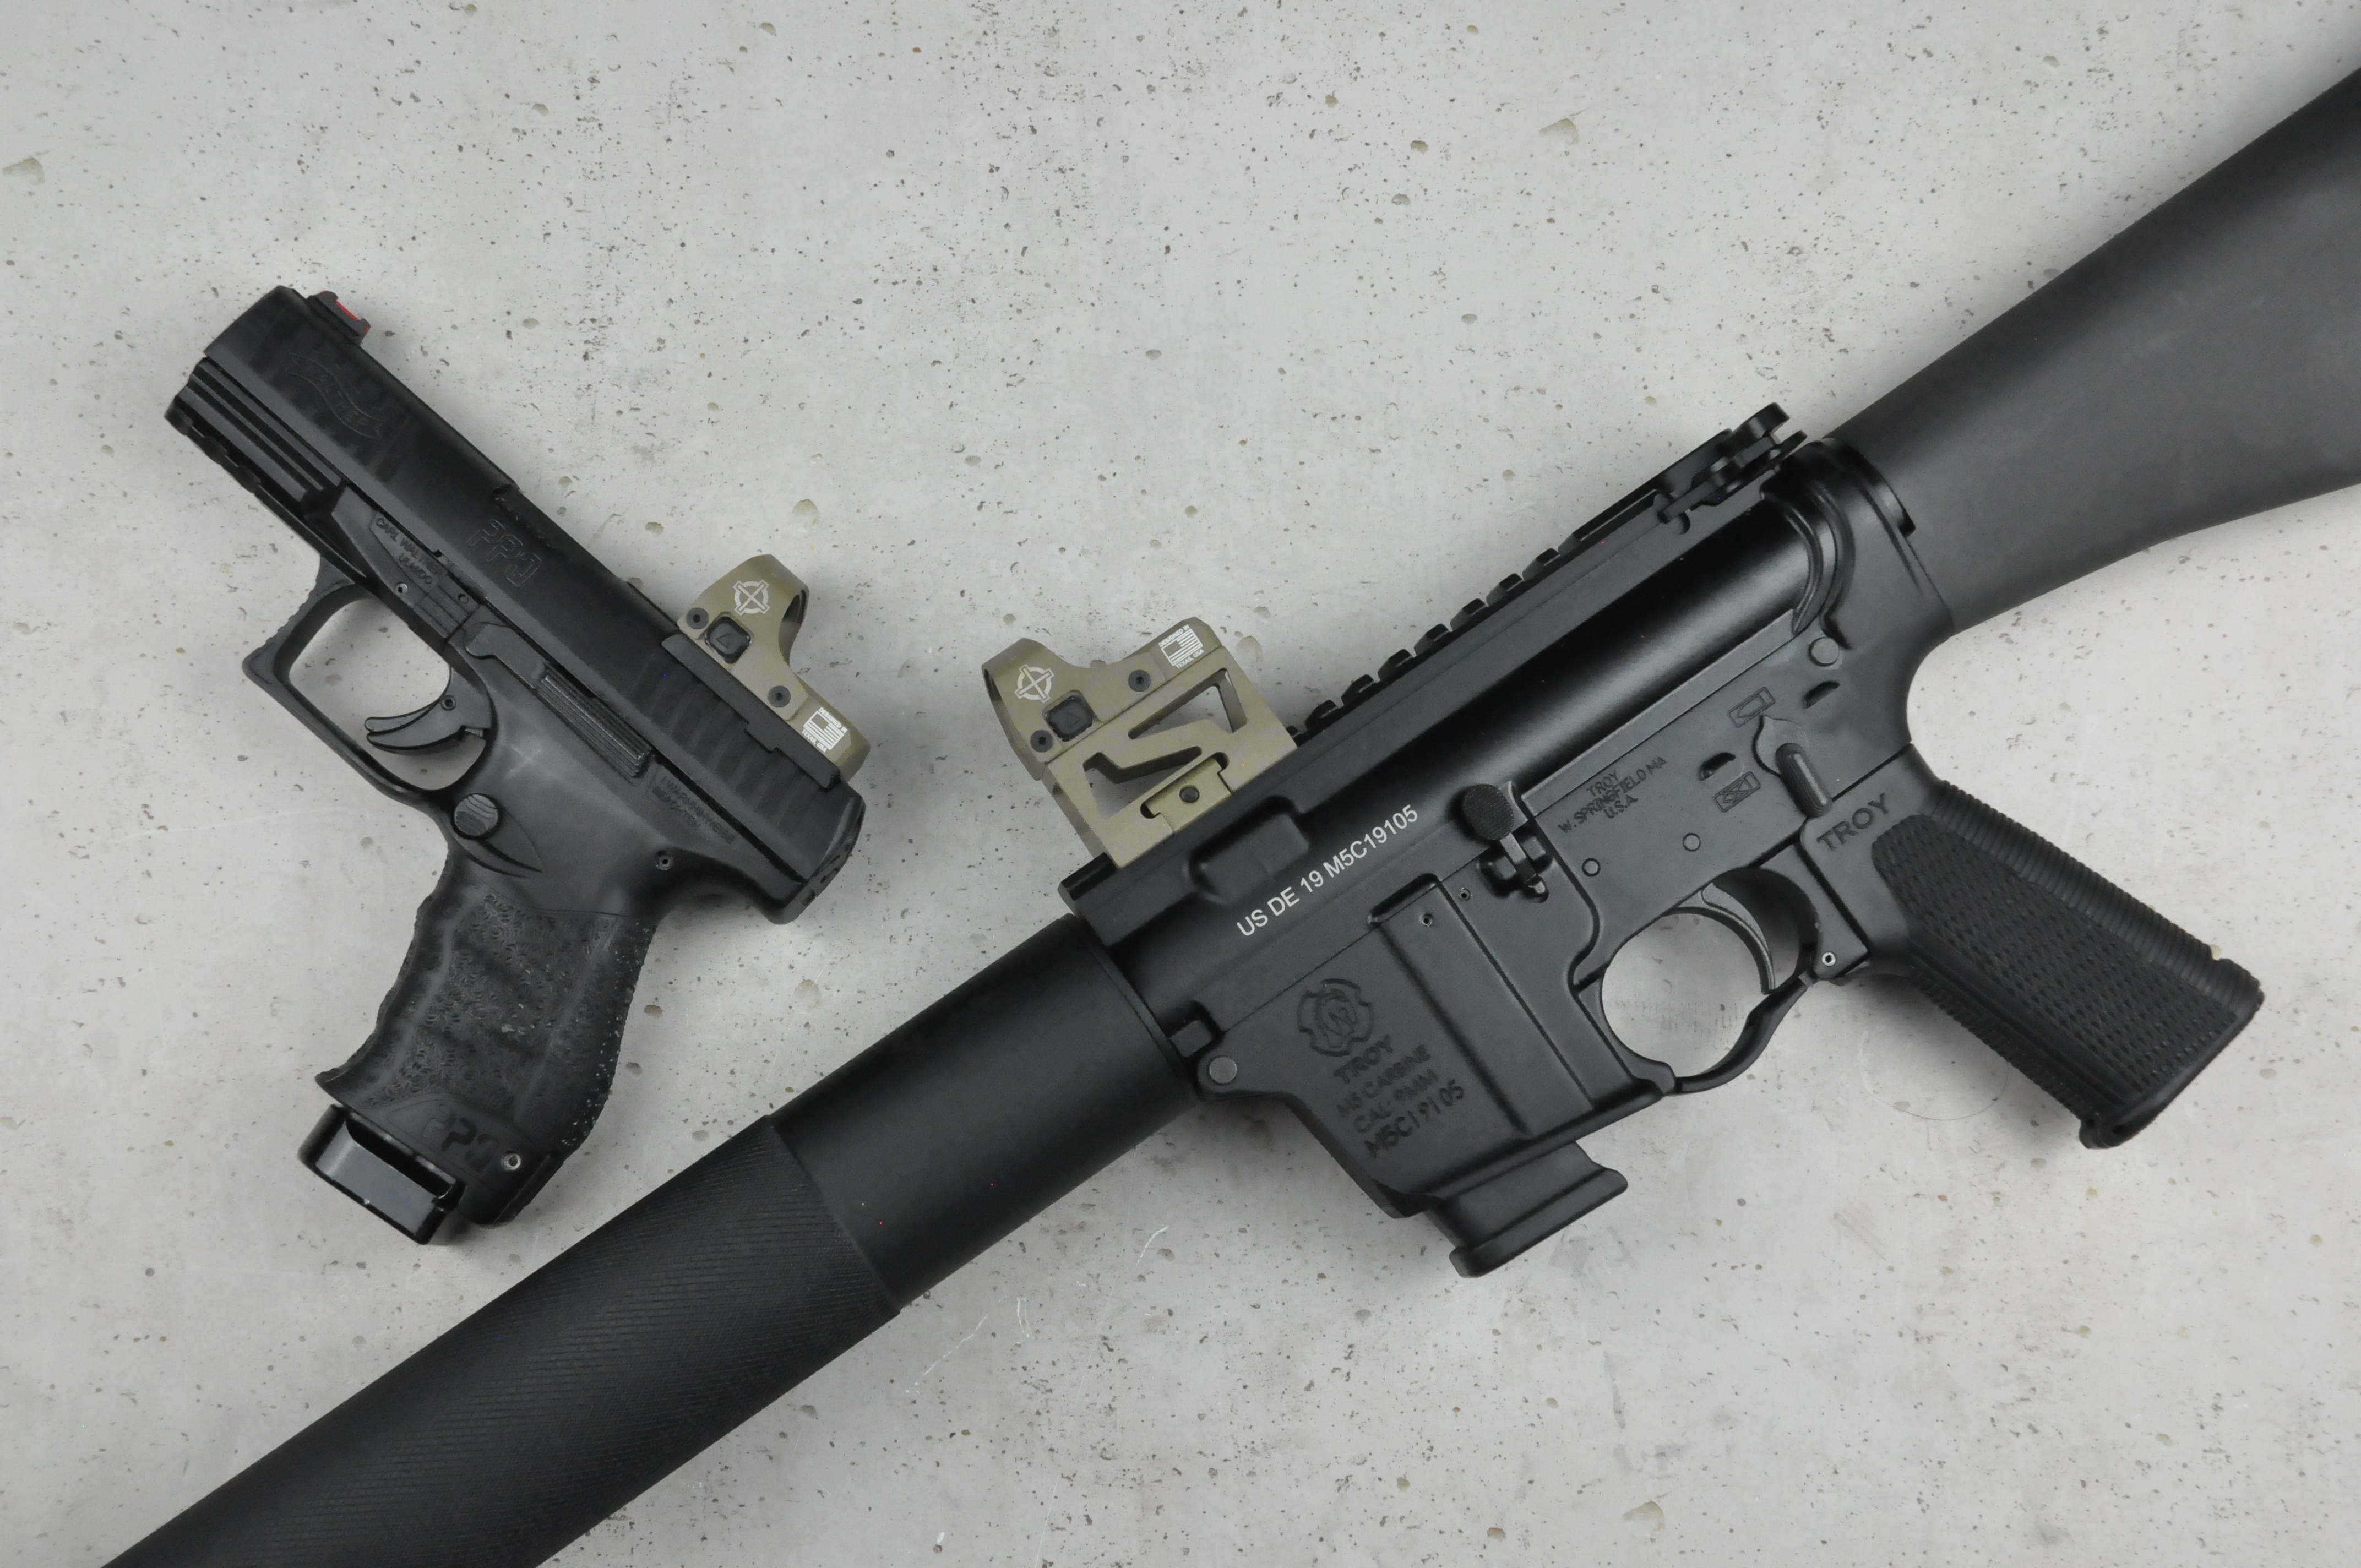 Test: Sightmark Mini Shot M-Spec - what can you expect from the